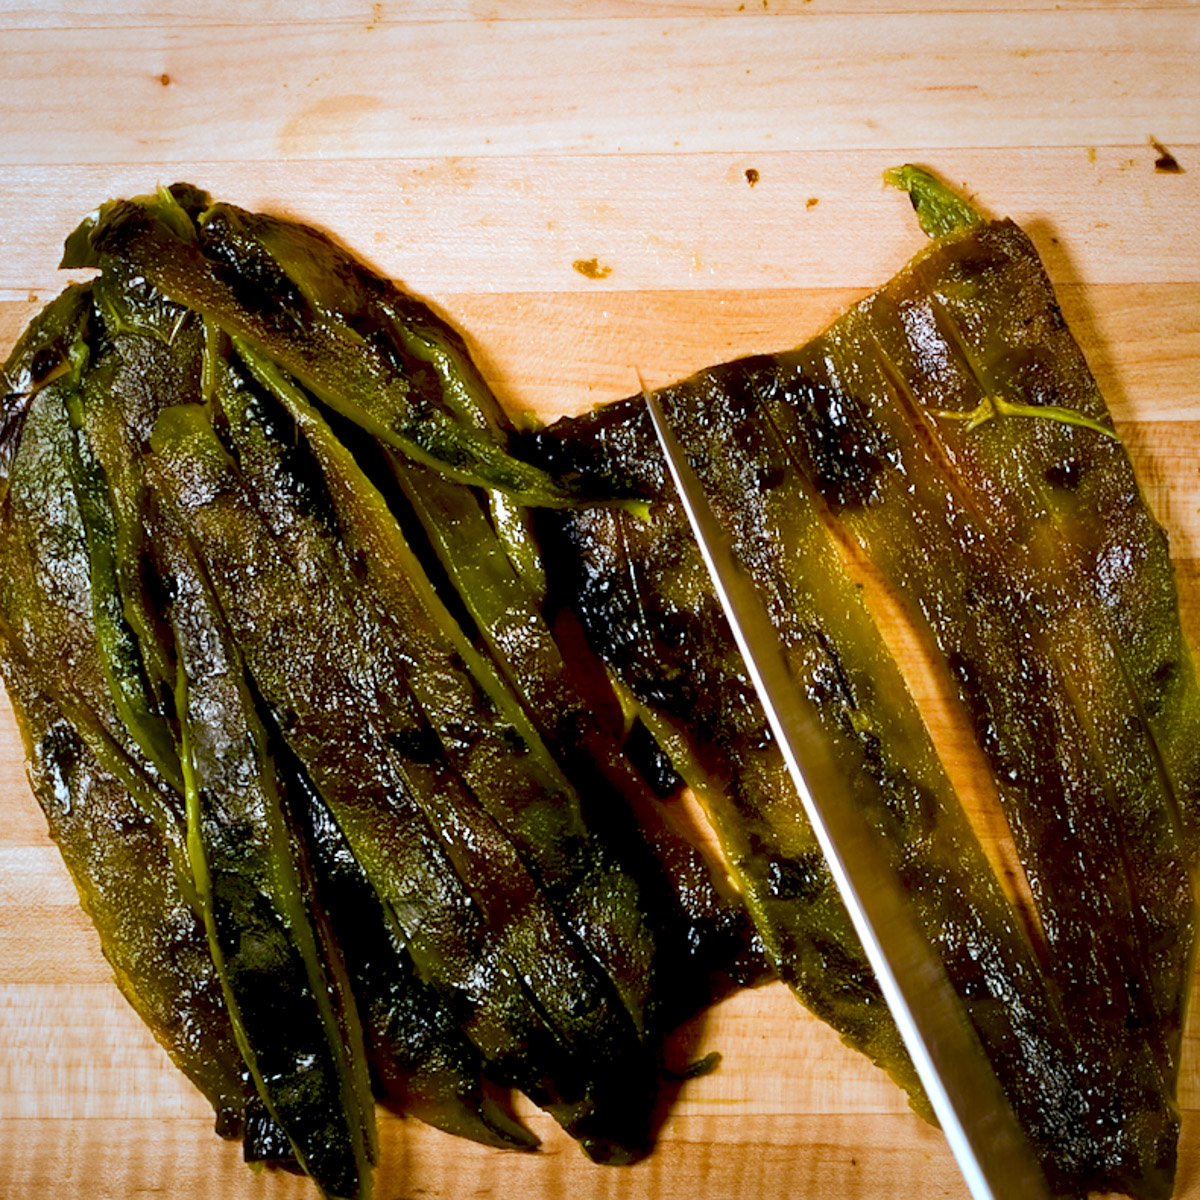 Cut the poblano peppers into small pieces.